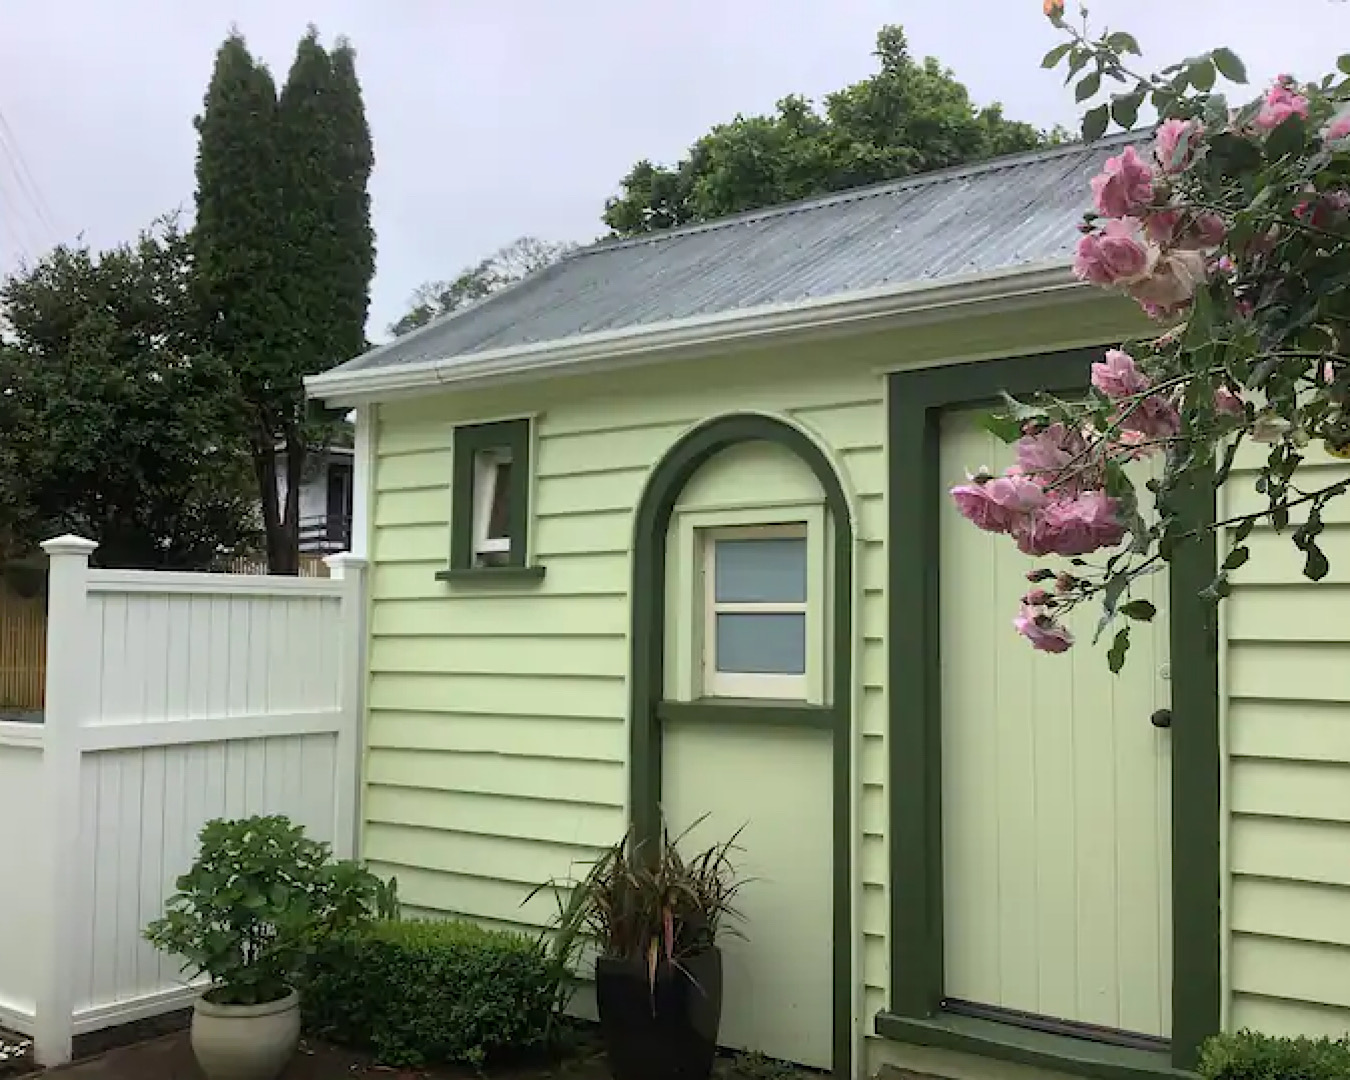 This lime green cottage is one of the best airbnbs in Hamilton. 